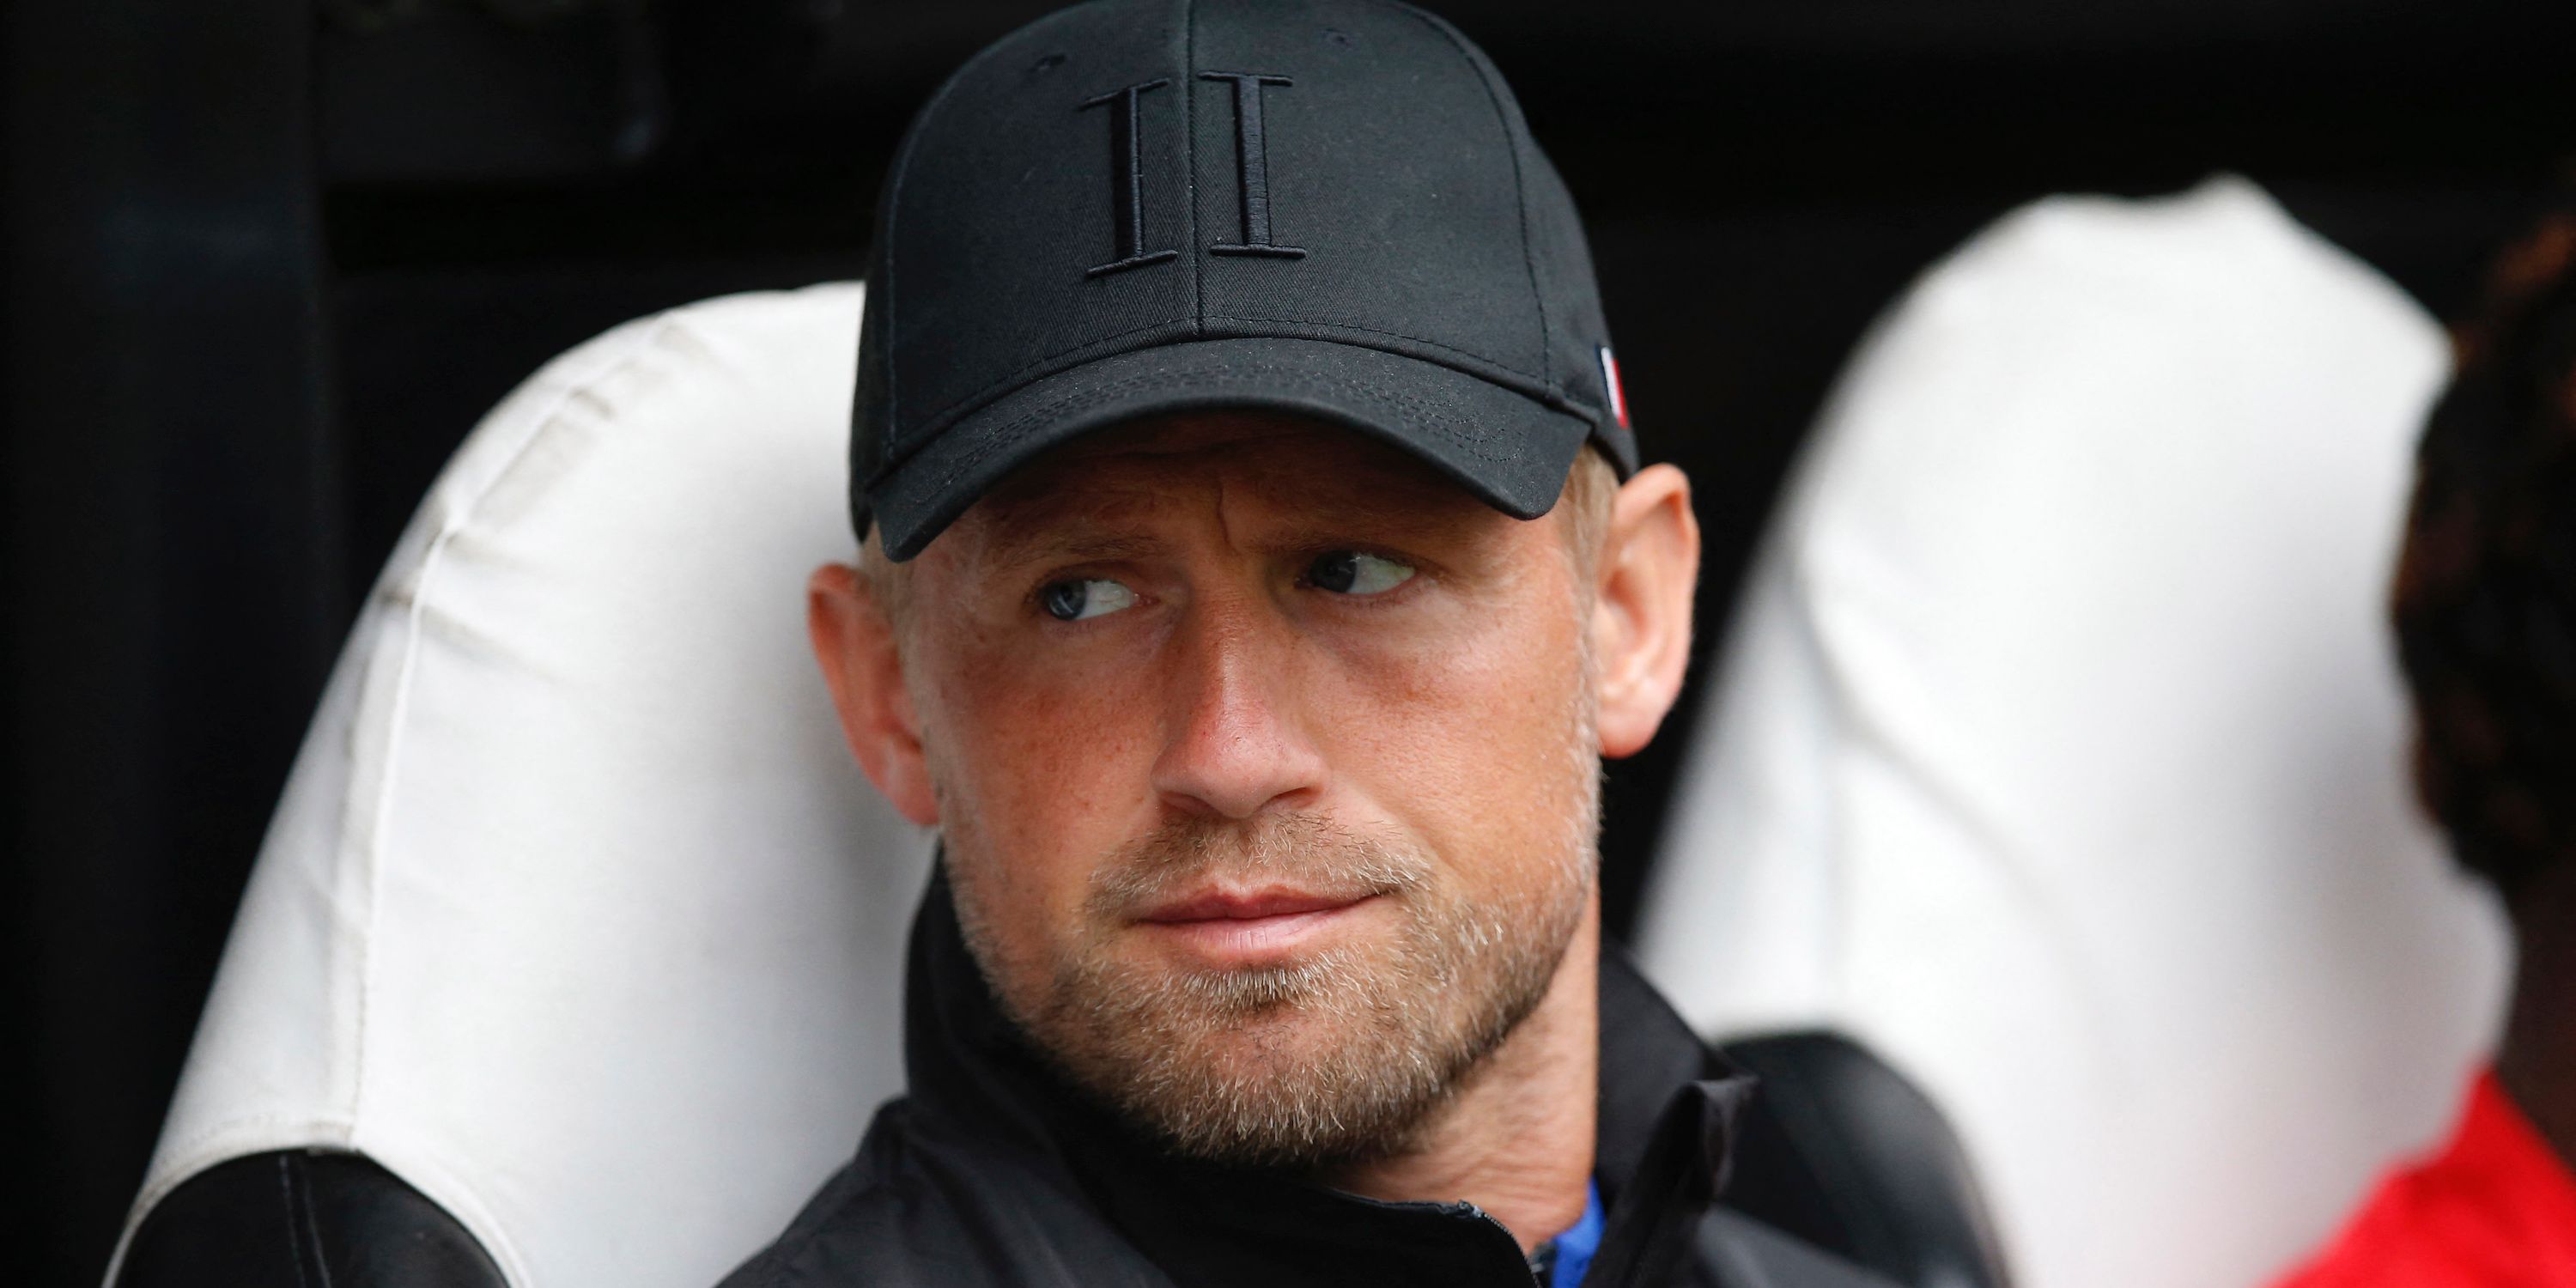 Nice's Kasper Schmeichel is pictured on the bench before the match